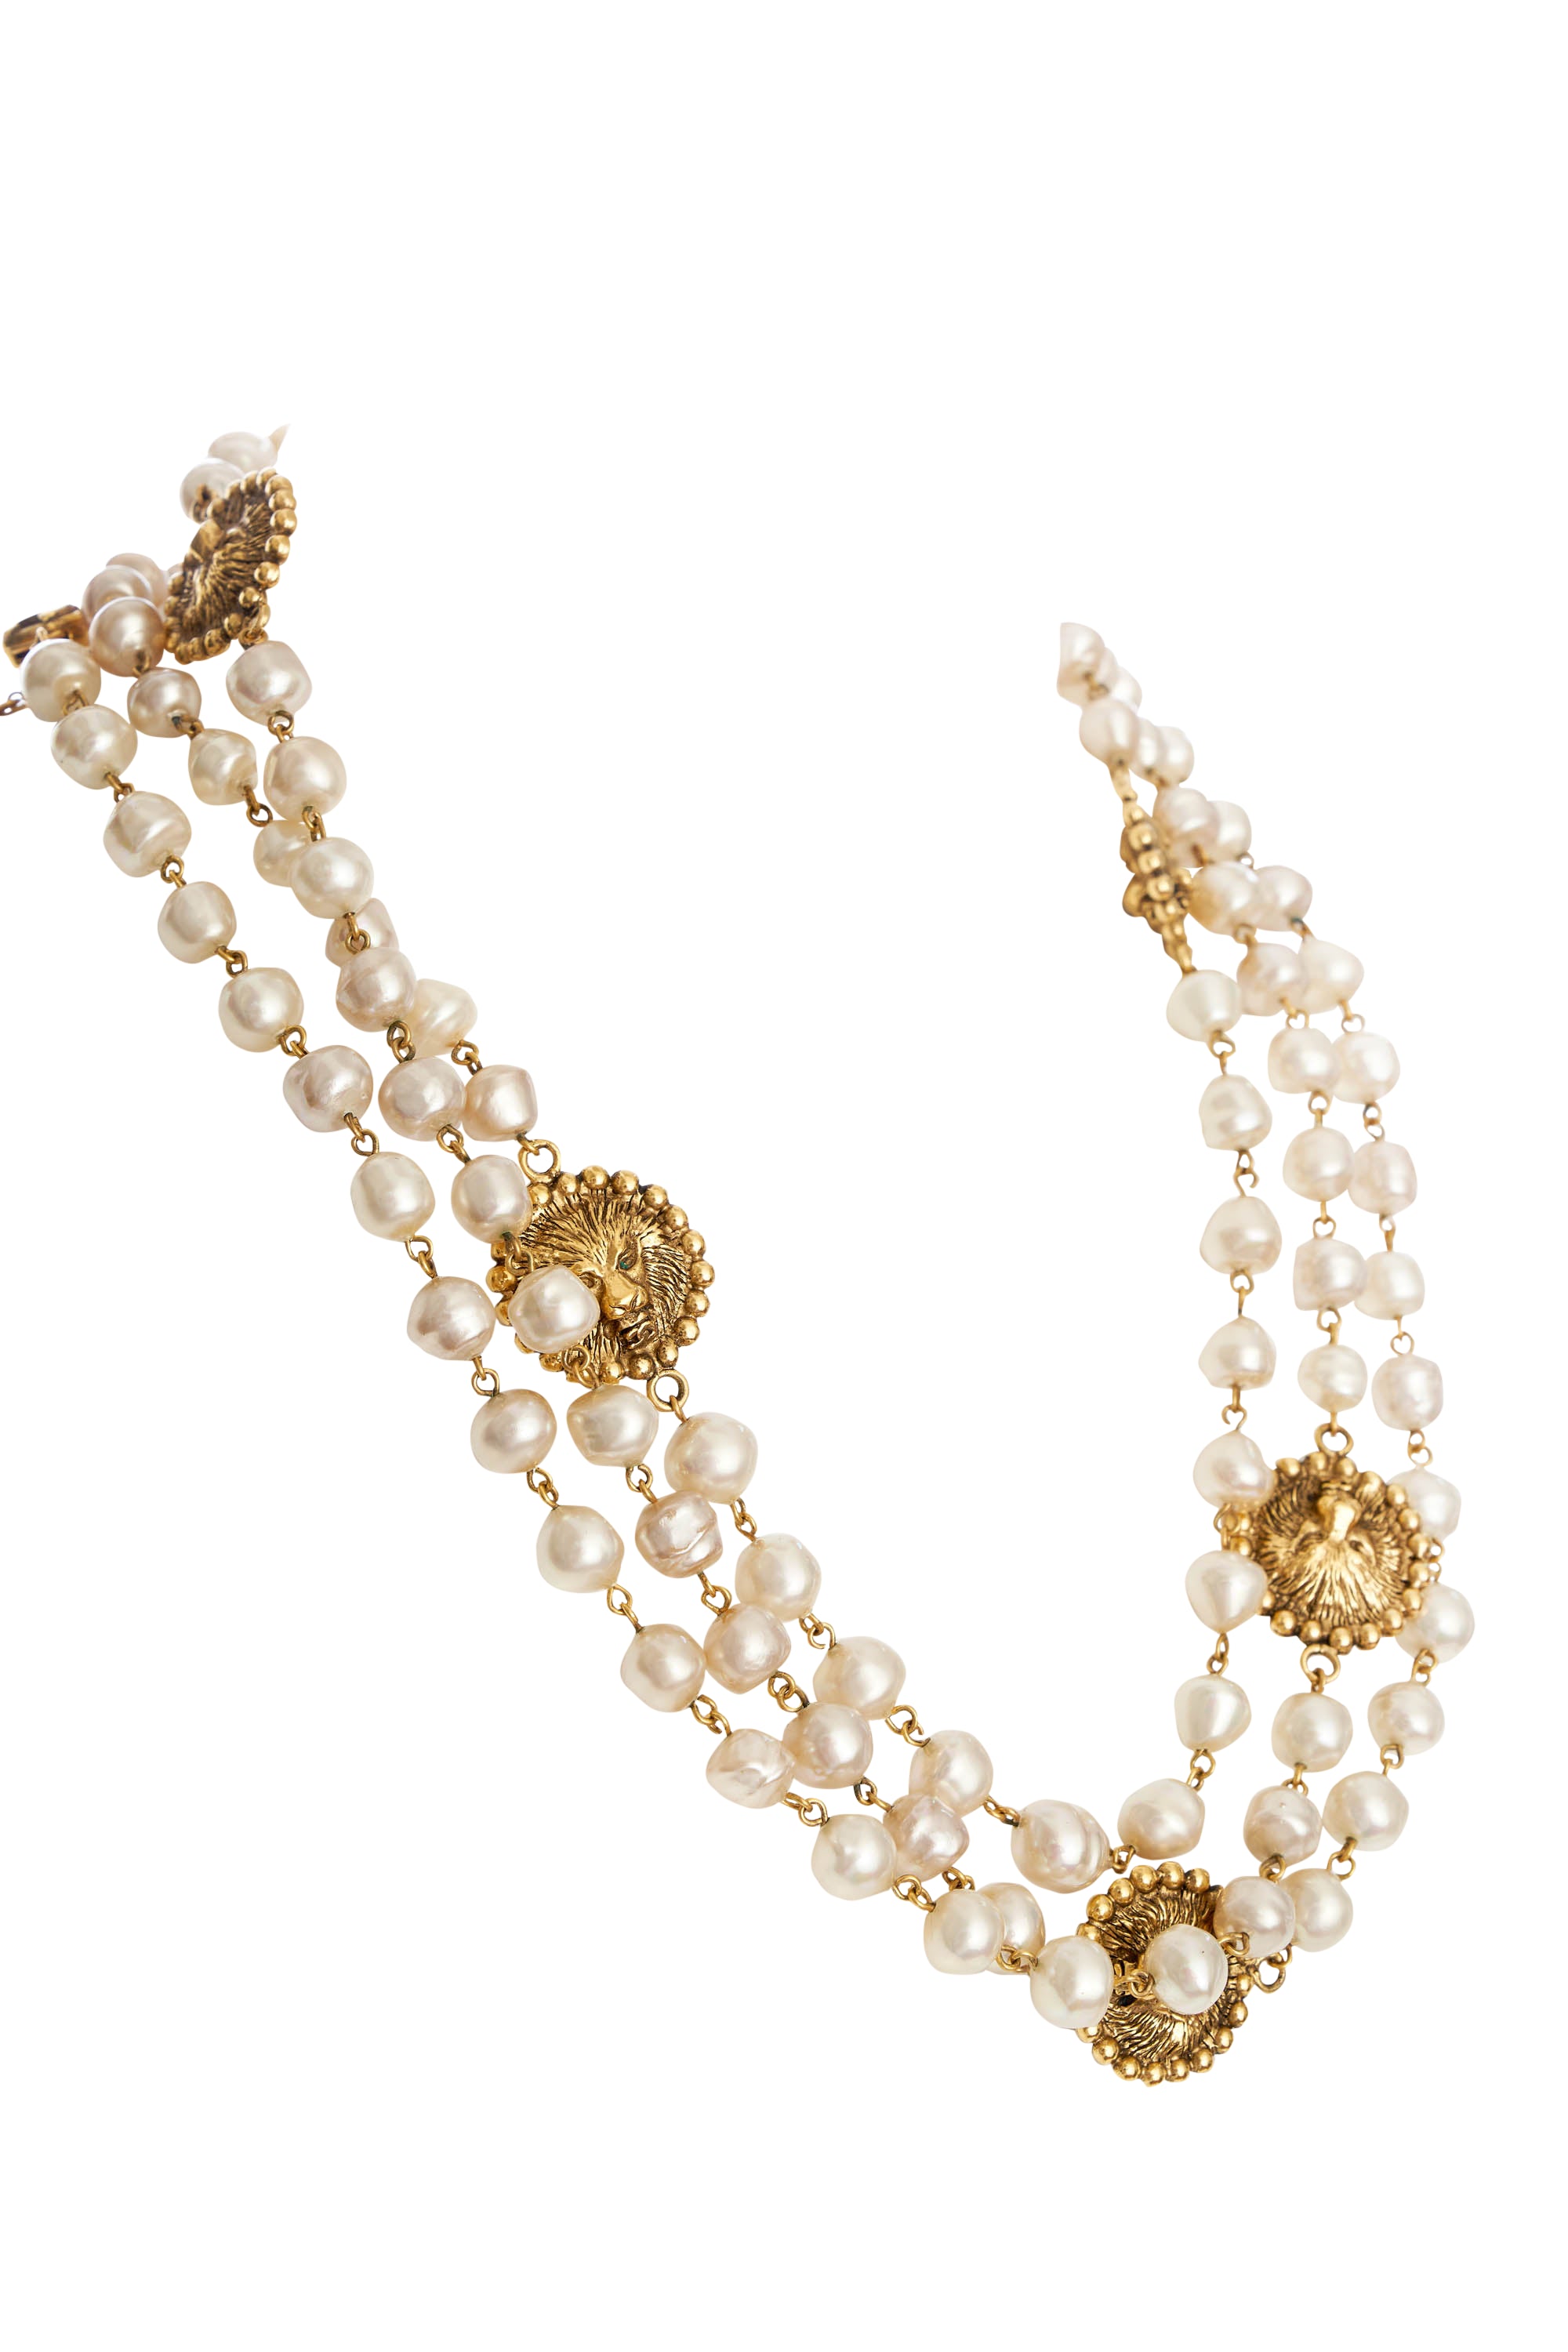 Chanel Pearl and Lion Medallion Sautoir Necklace